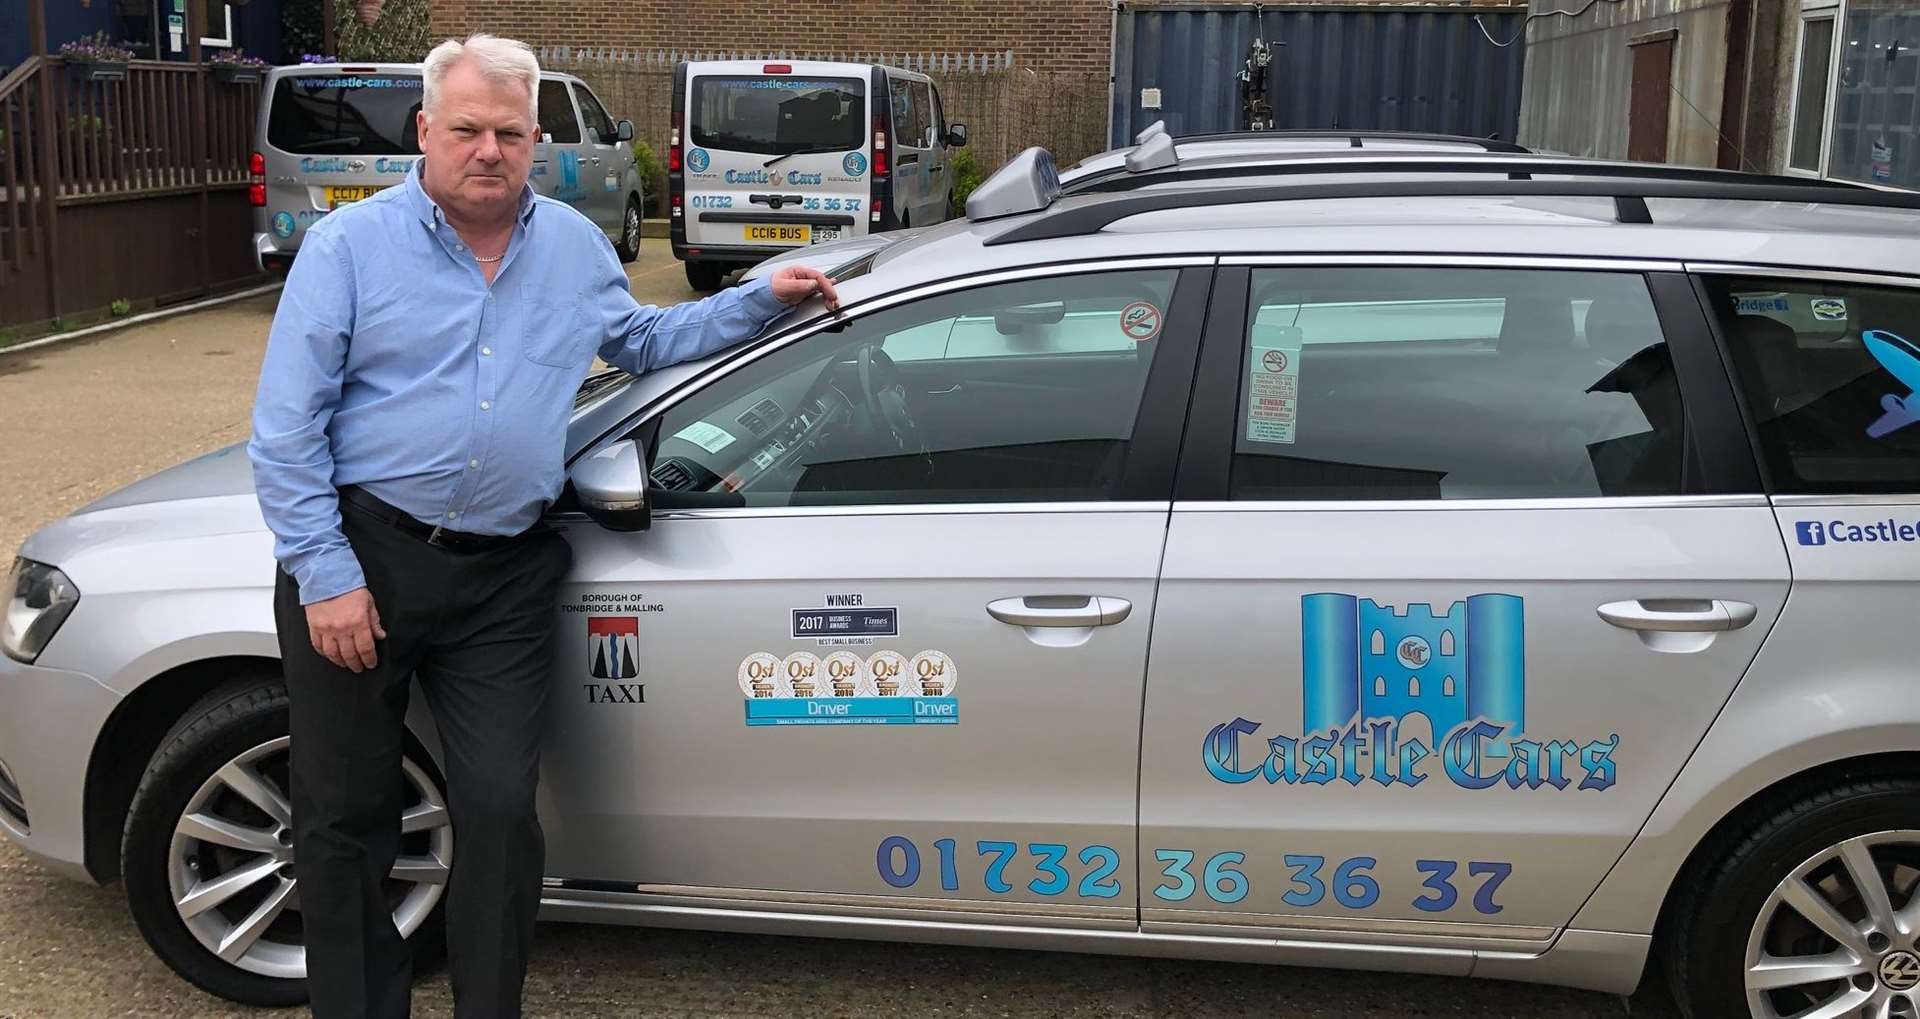 Terry Hill is the owner of the taxi firm